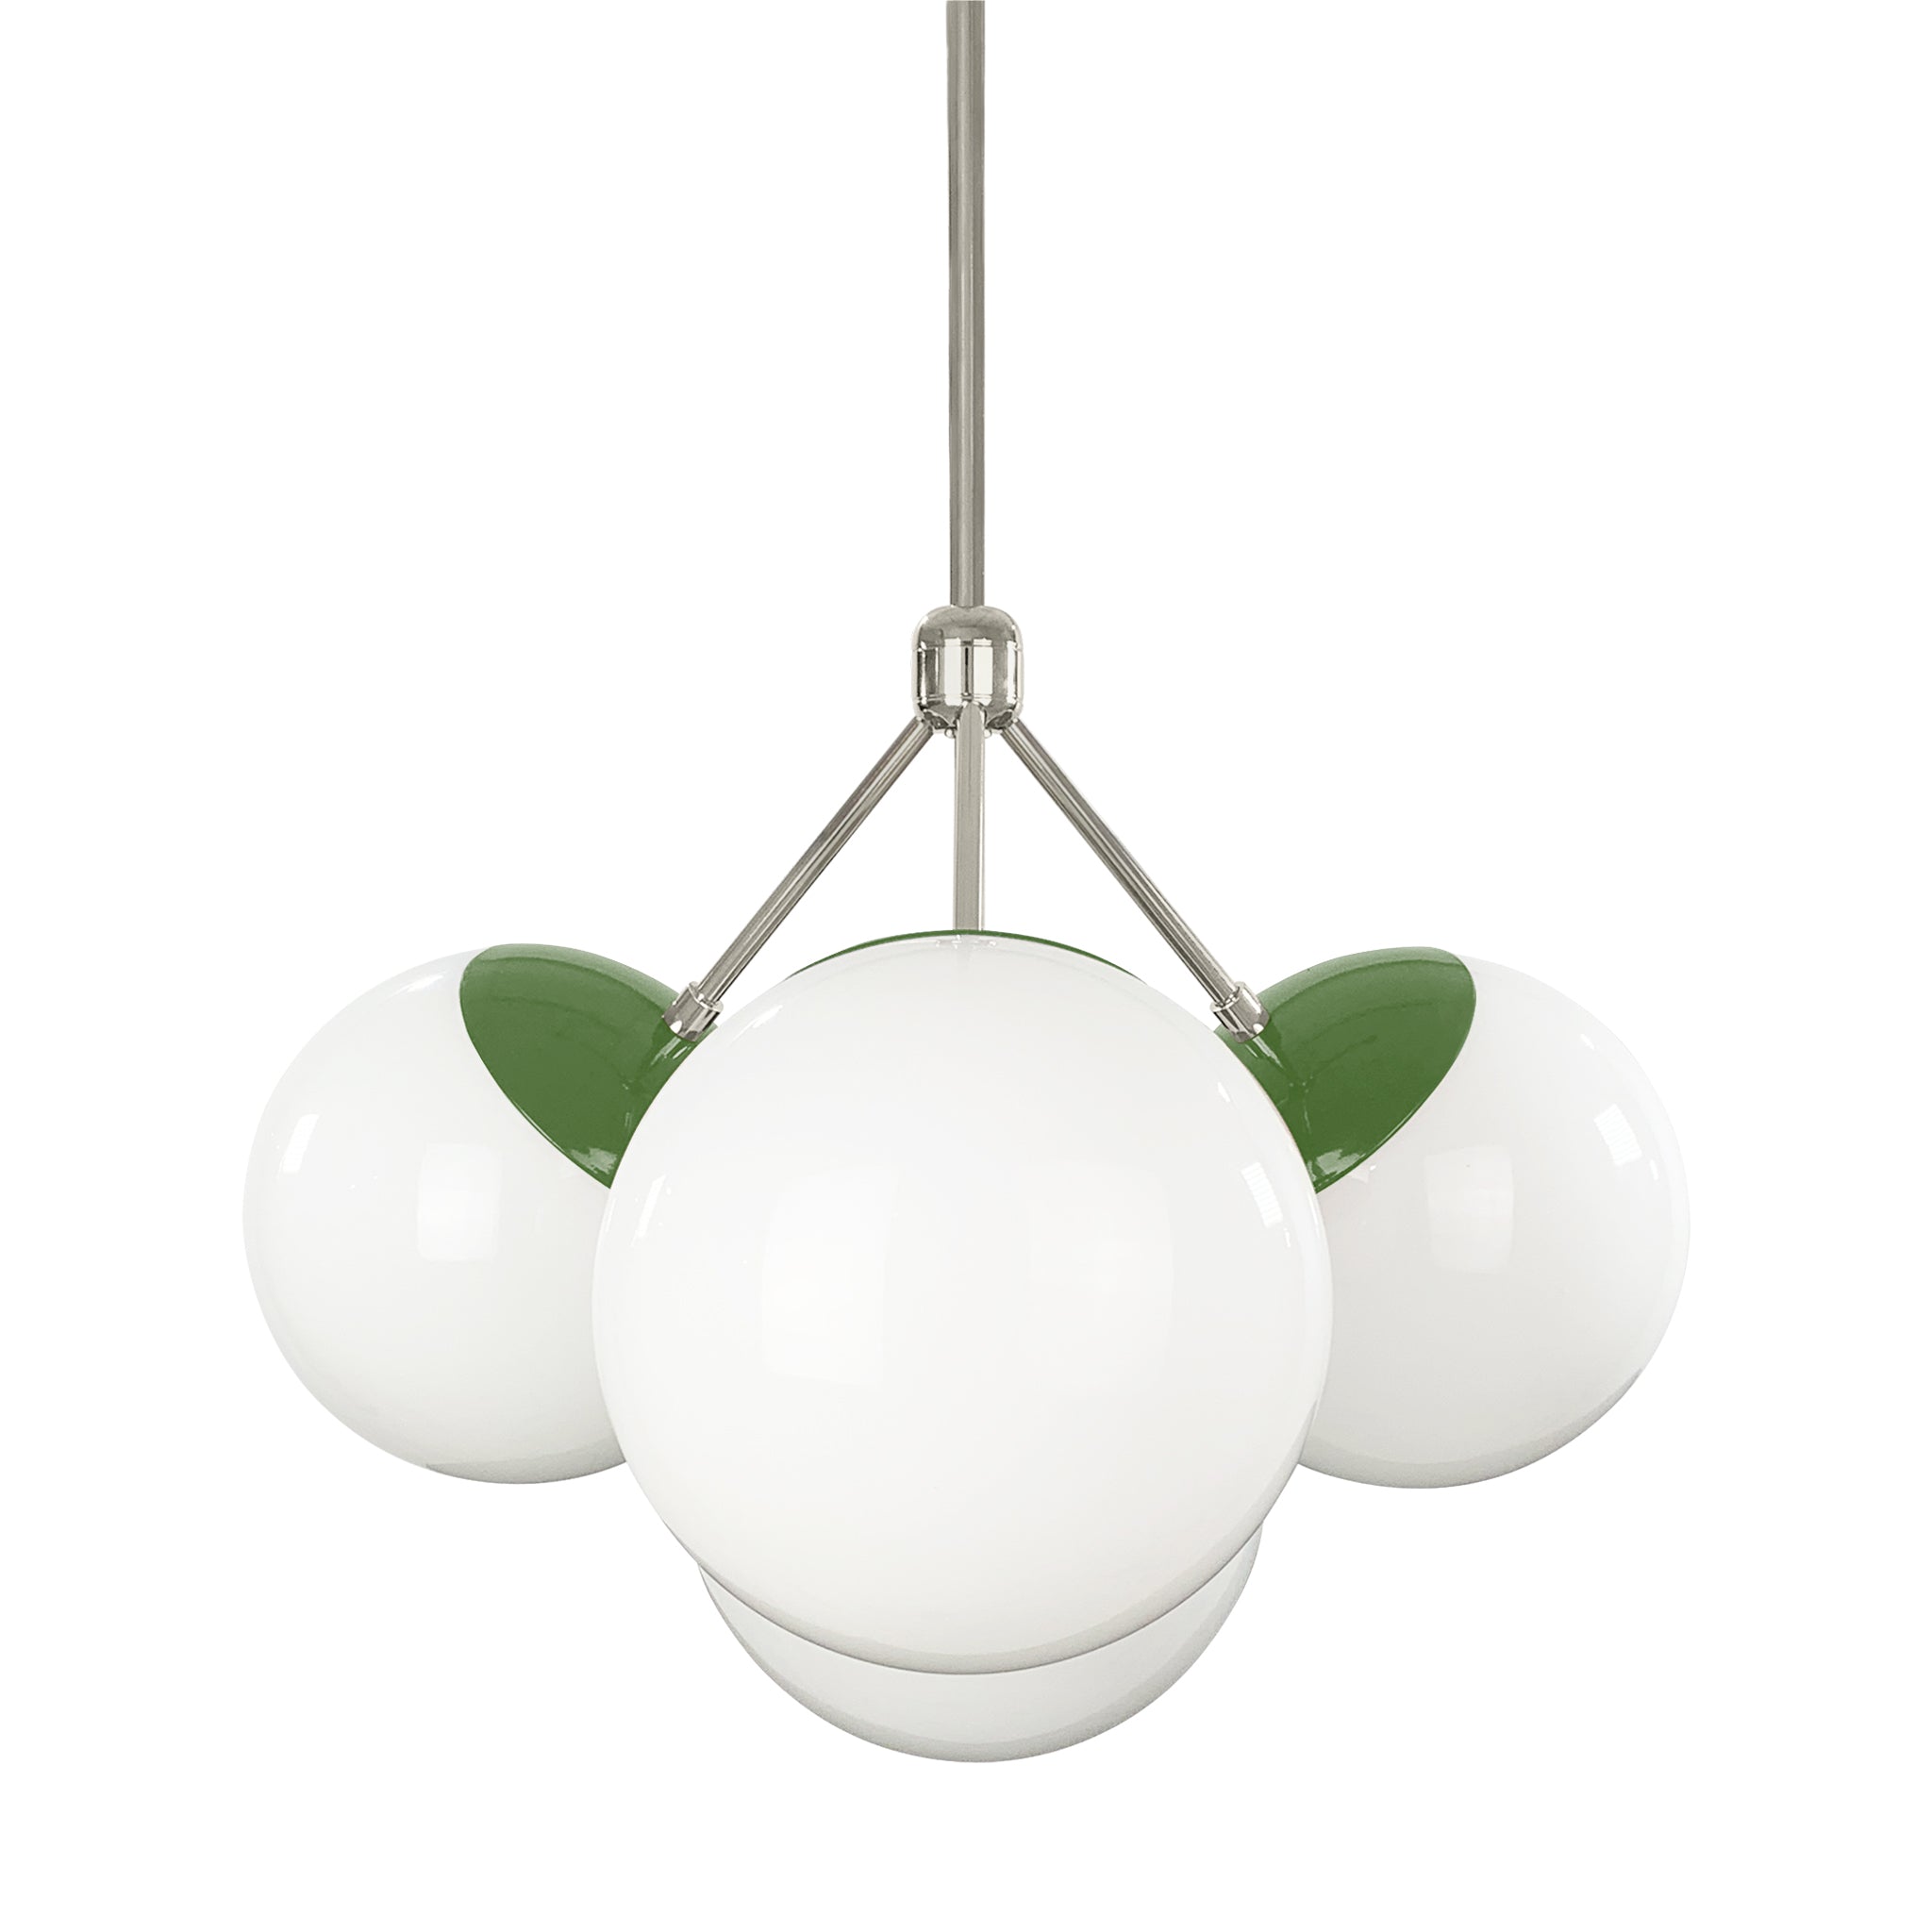 Nickel and python green color Tetra chandelier Dutton Brown lighting